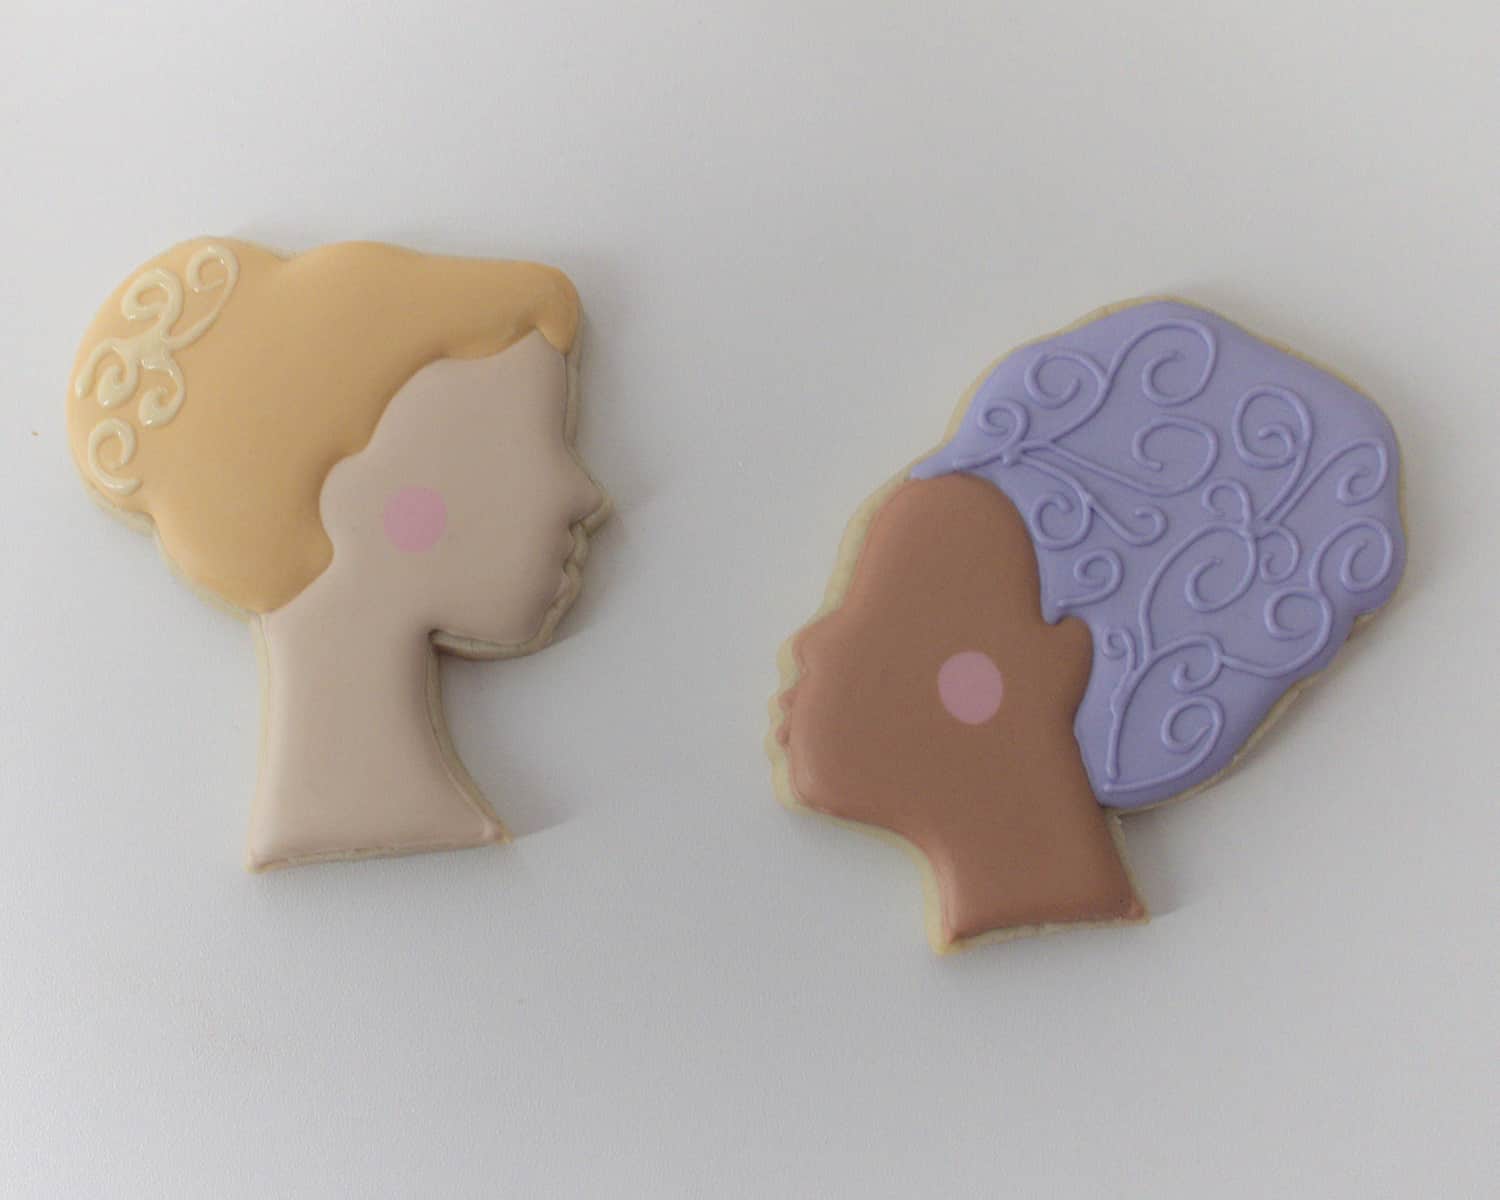 iced silhouette cookies